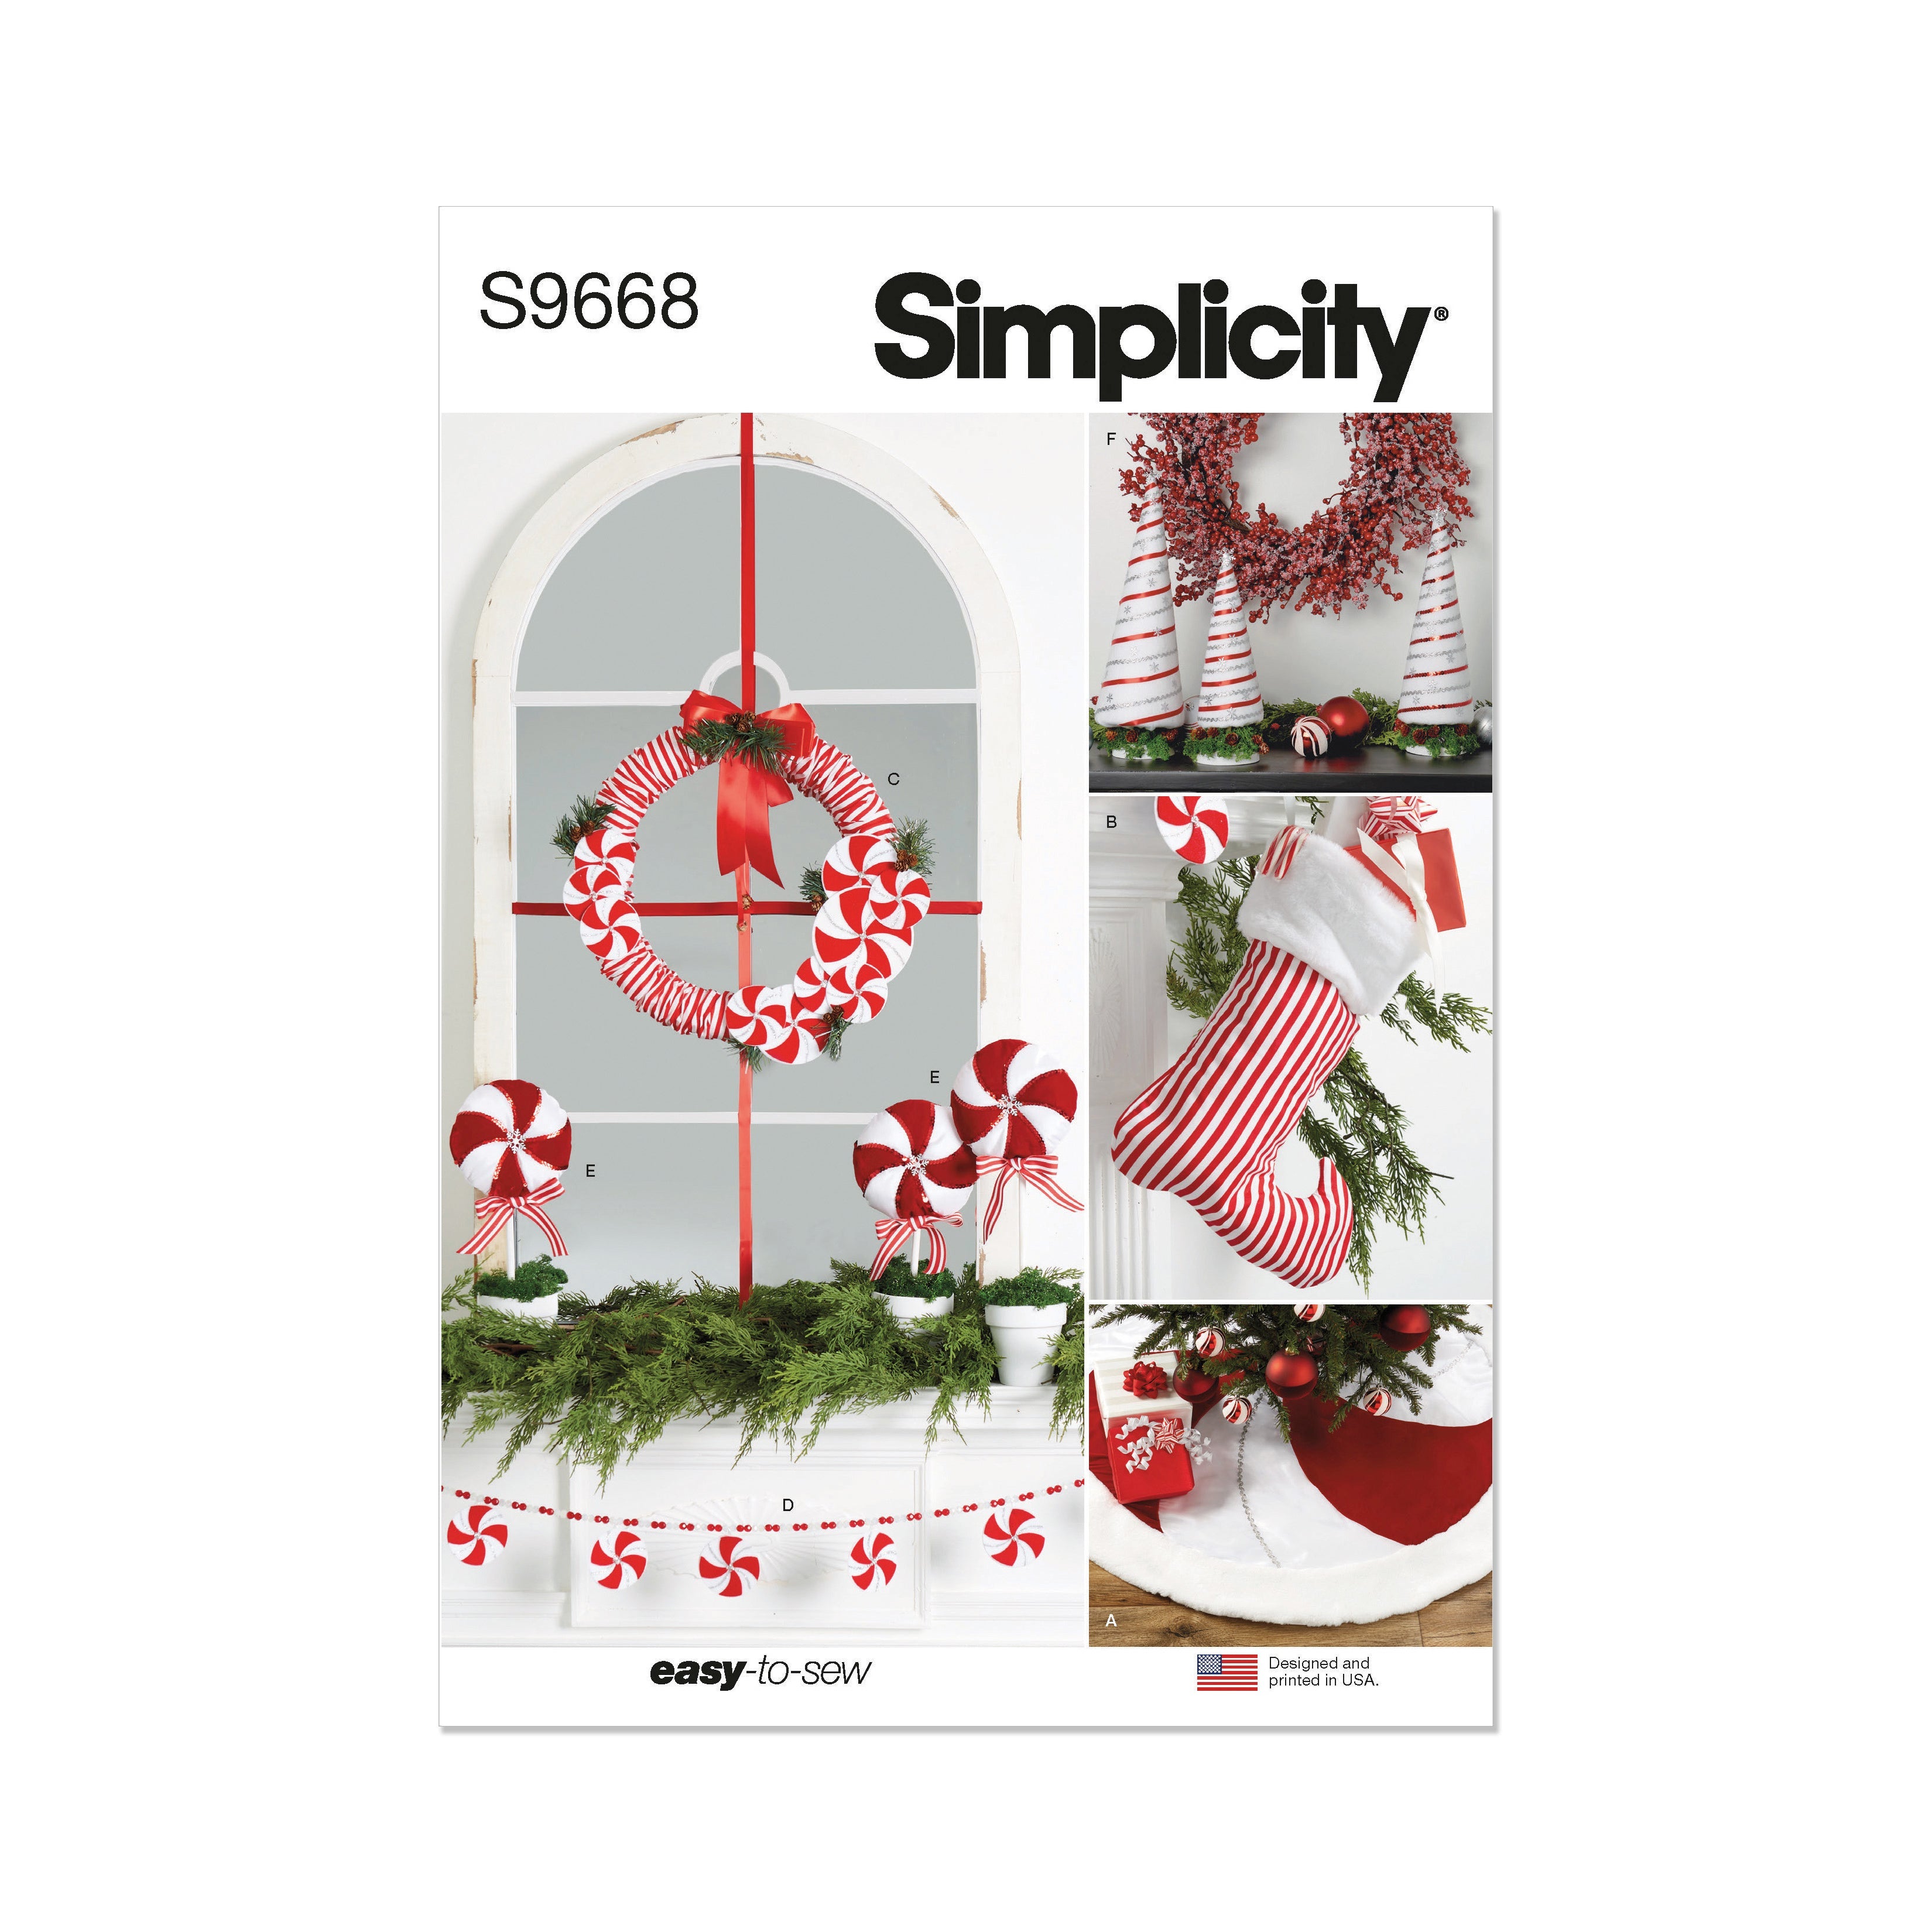 Simplicity pattern 9668 Christmas Decor from Jaycotts Sewing Supplies